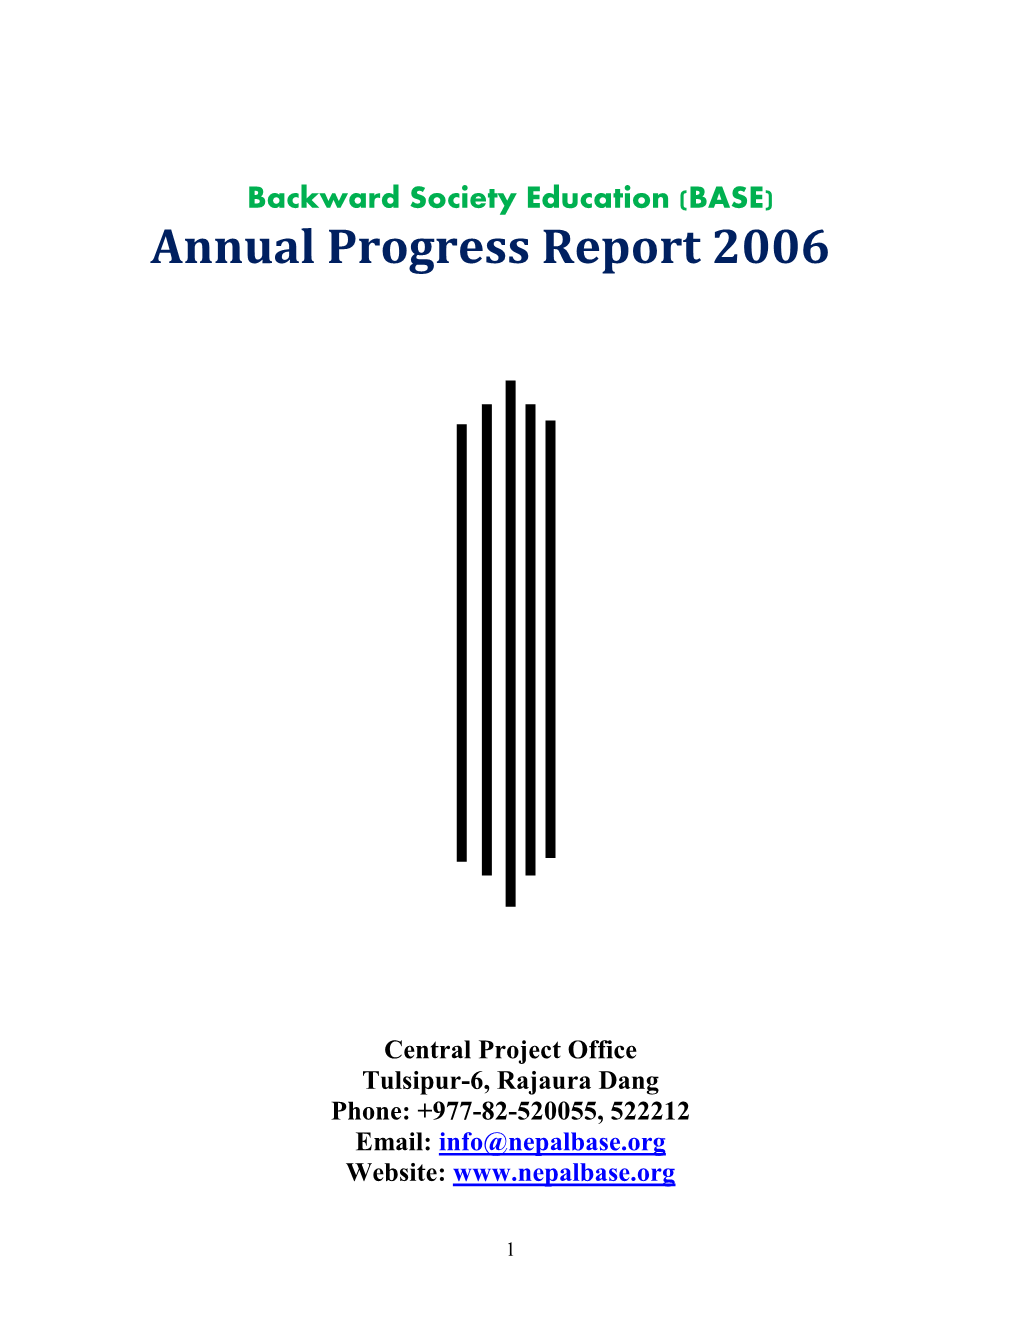 Annual Report and District Wise Successful Stories, Plans, Strategies and Publications